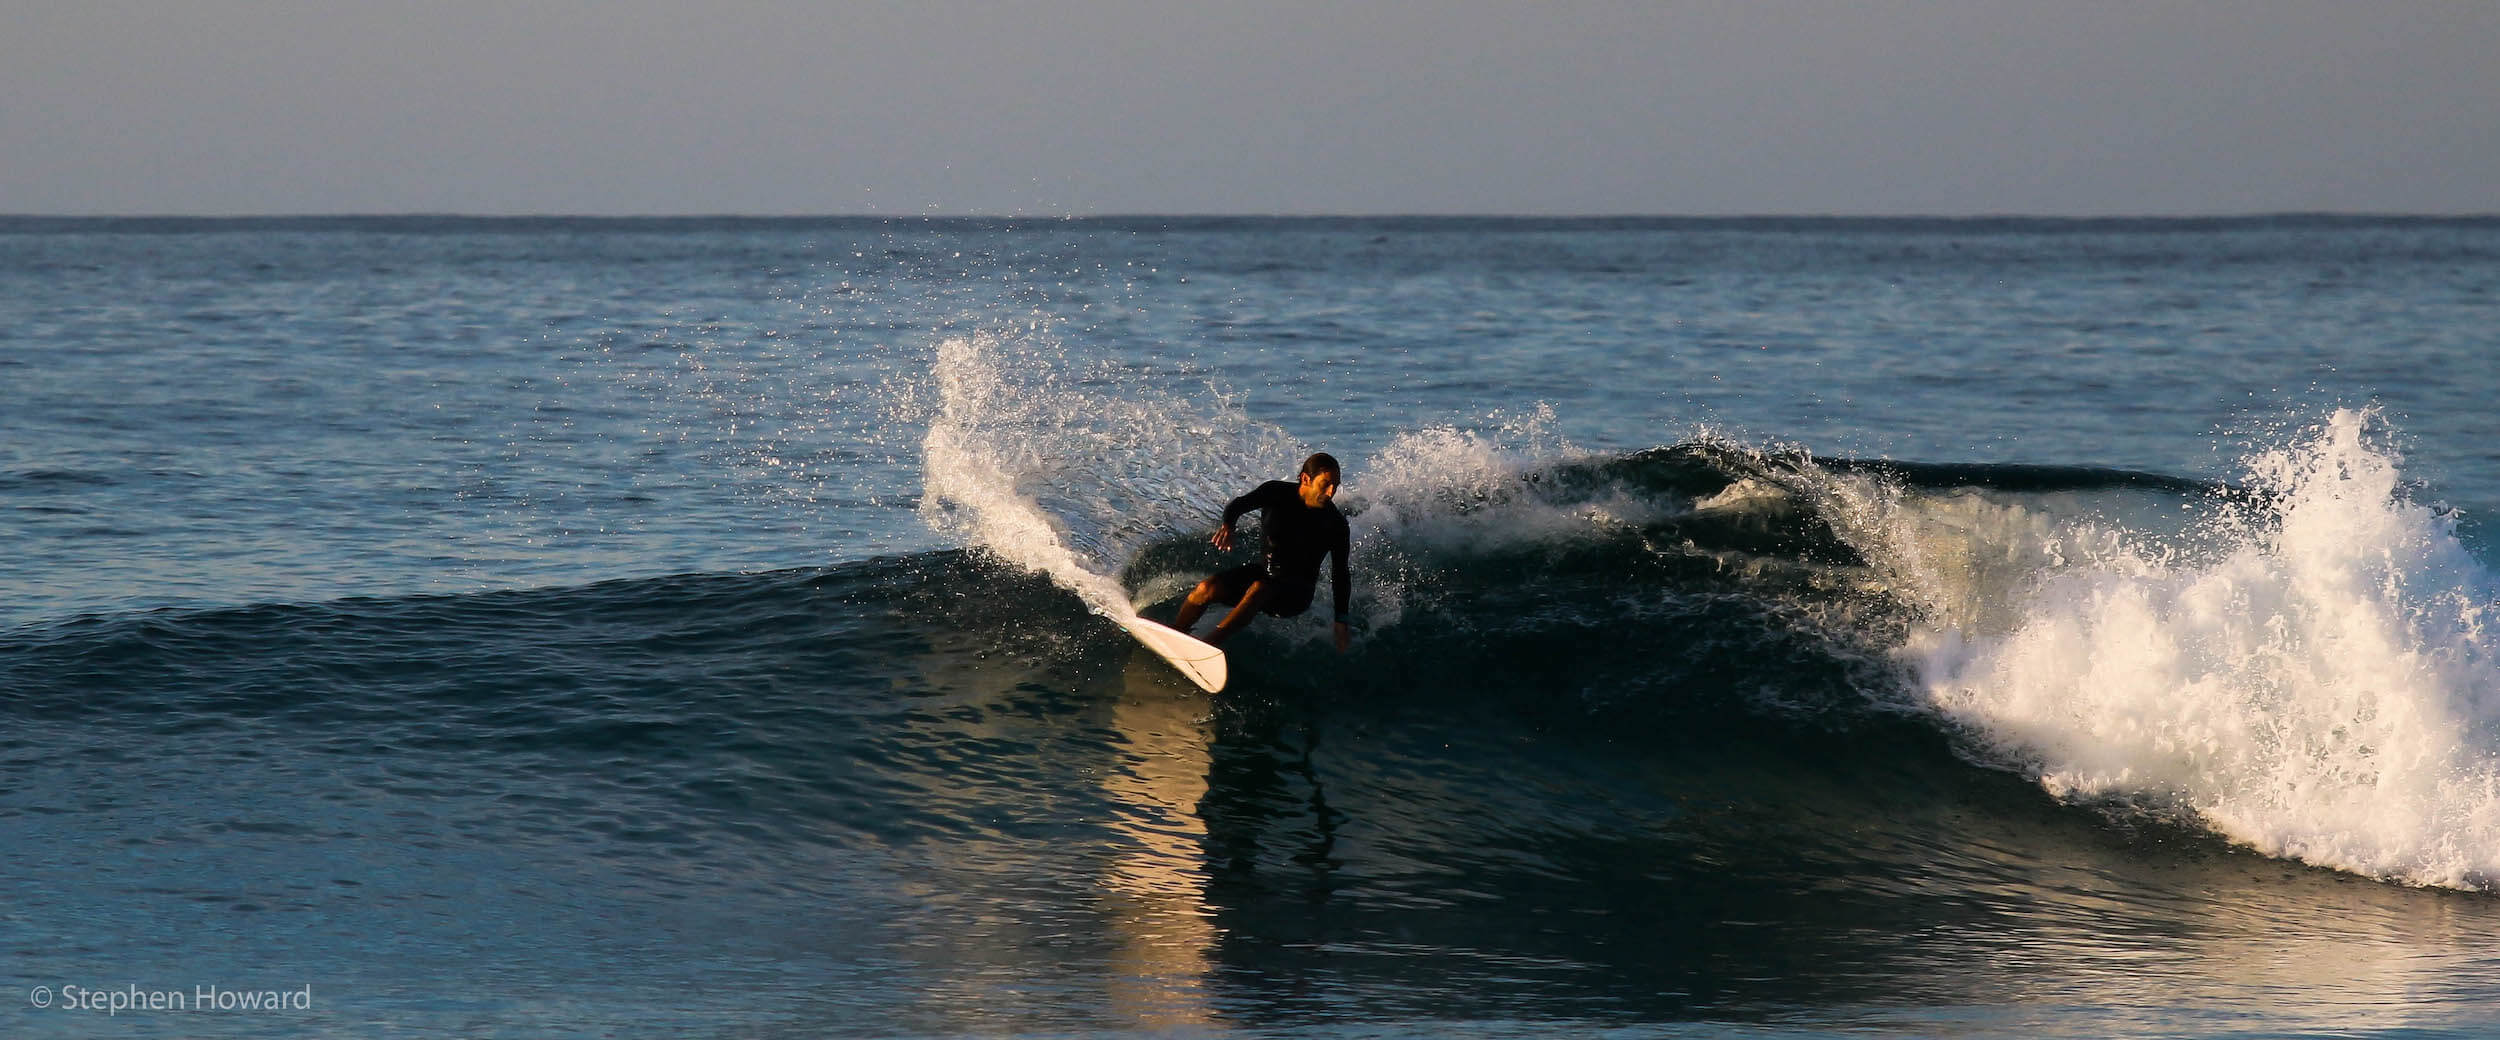 Mike Psillakis surfing a Quad fish handshaped